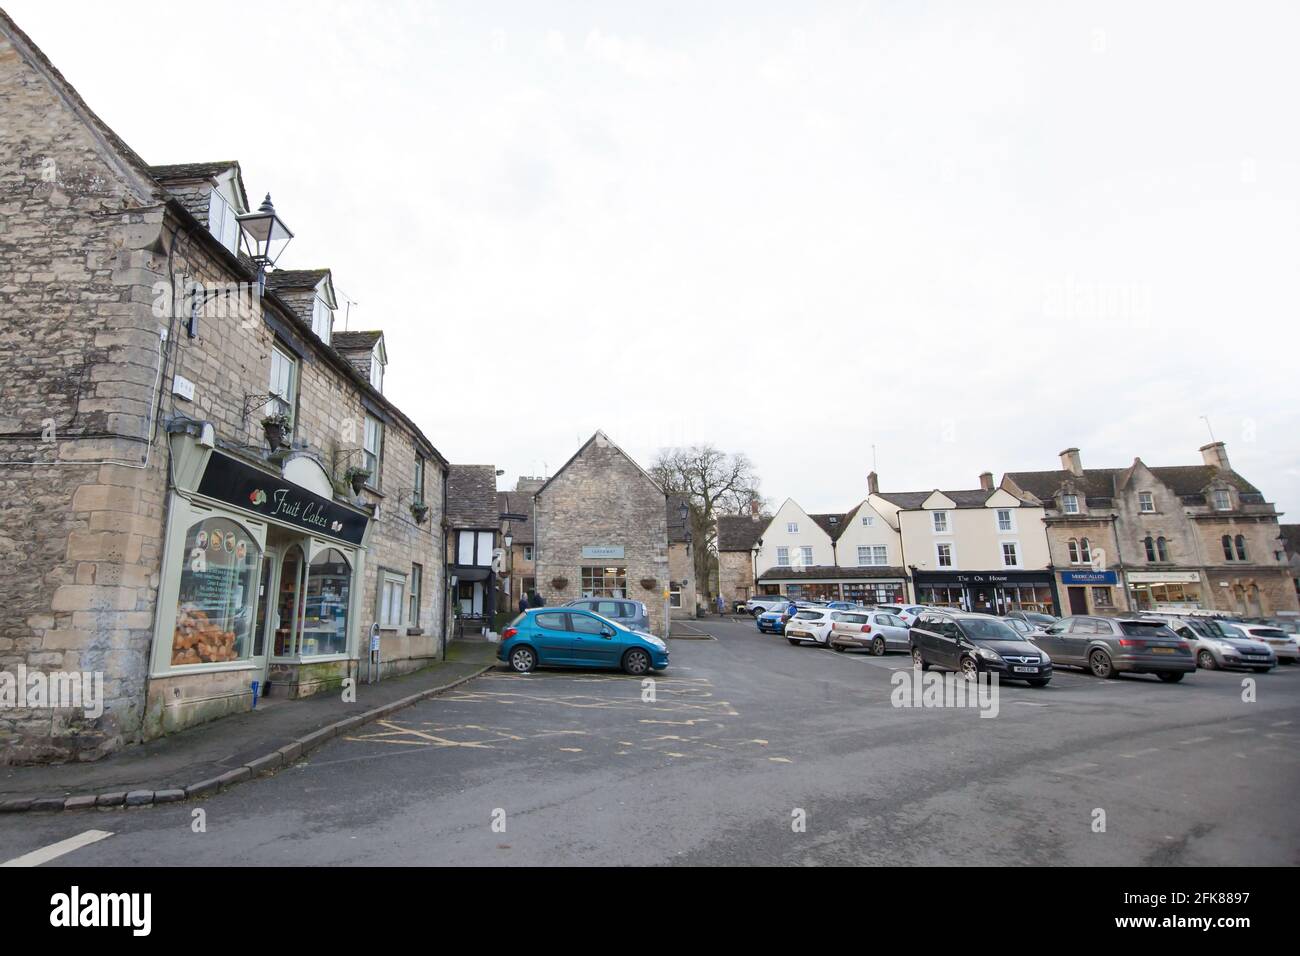 The small shops of Northleach, Gloucestershire in the UK Stock Photo